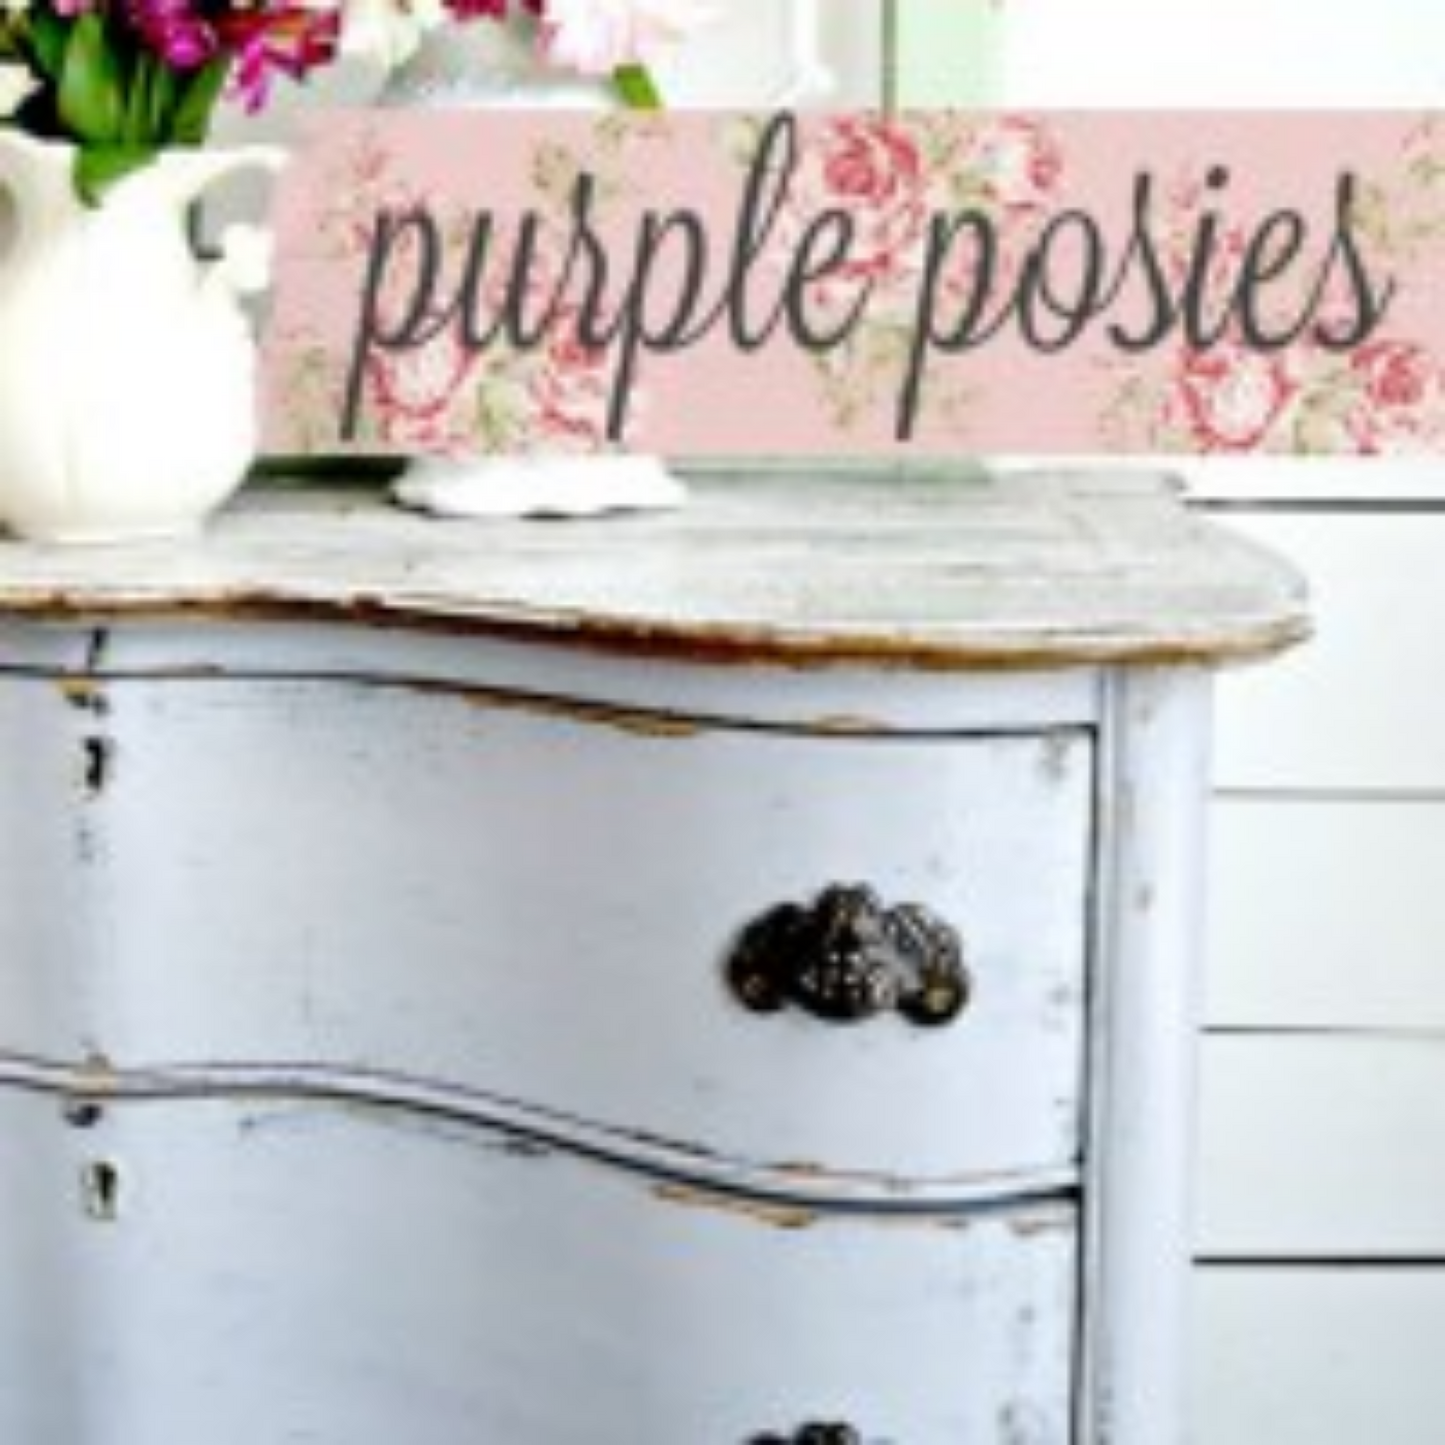 Antique dresser front painted in Purple Posies(lavender)  by Sweet PIckins Milk Paint available at Milton's Daughter